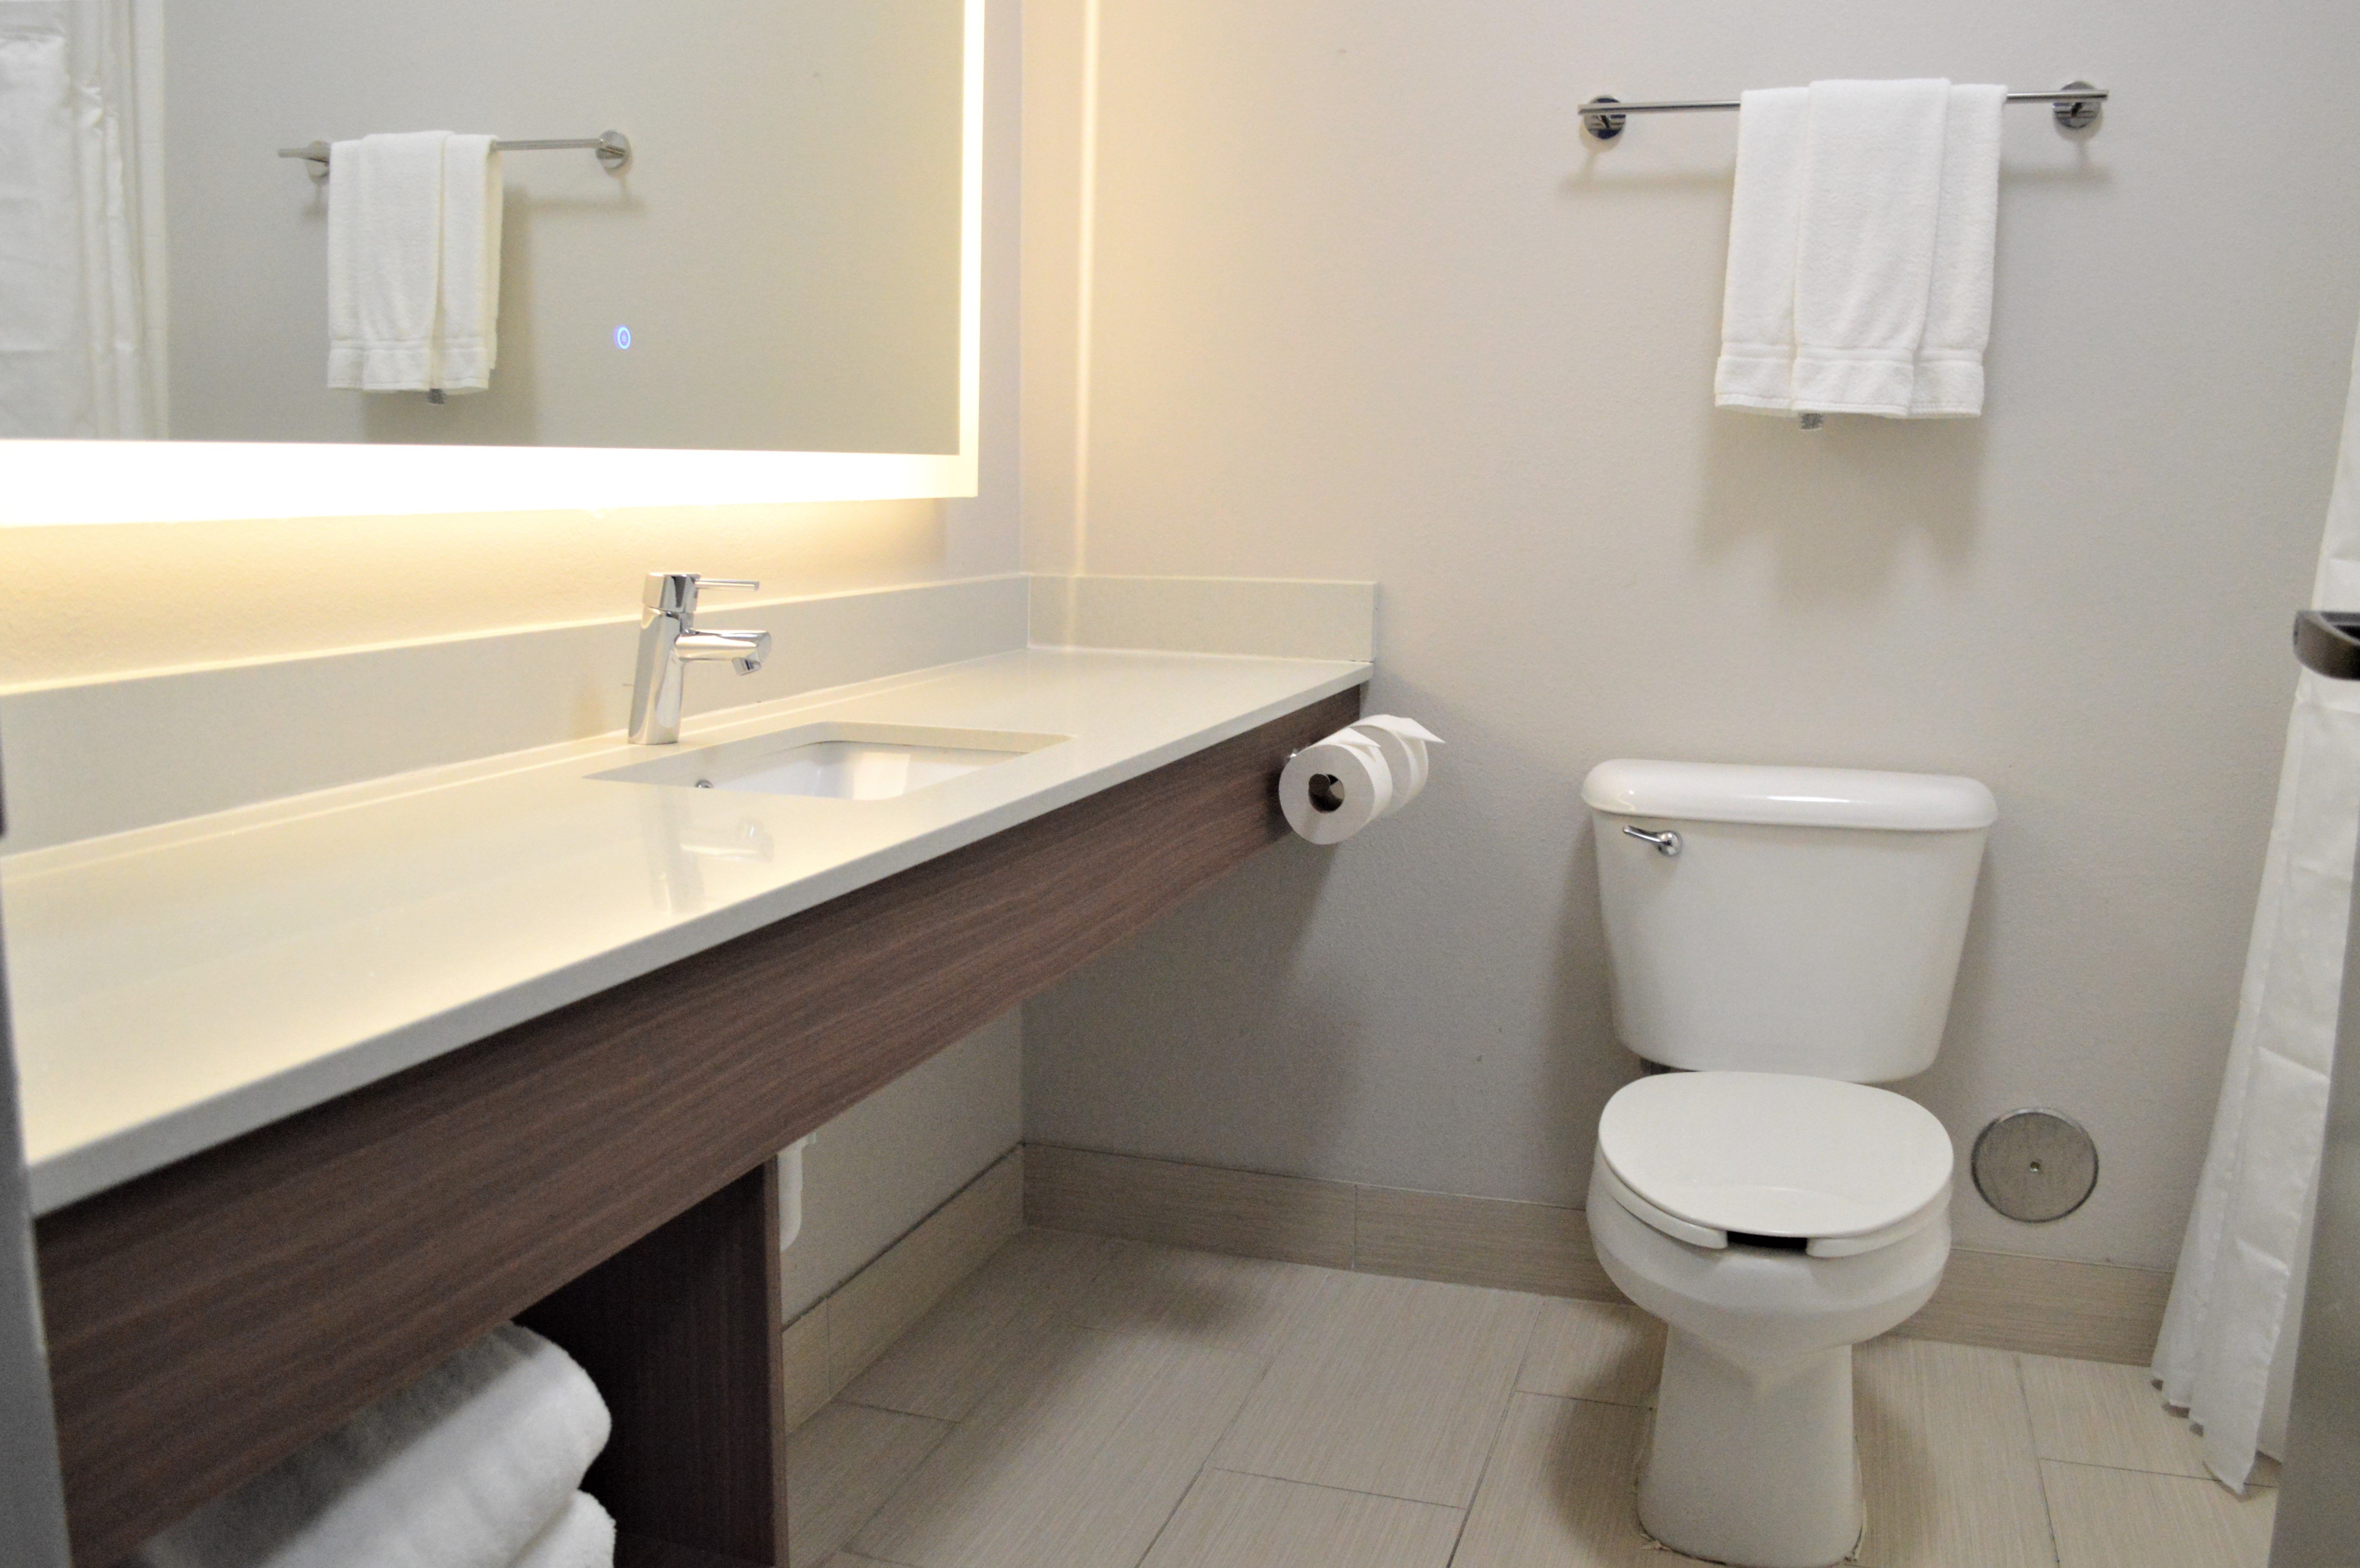 Our guest bathrooms have plenty of counter space to get ready.